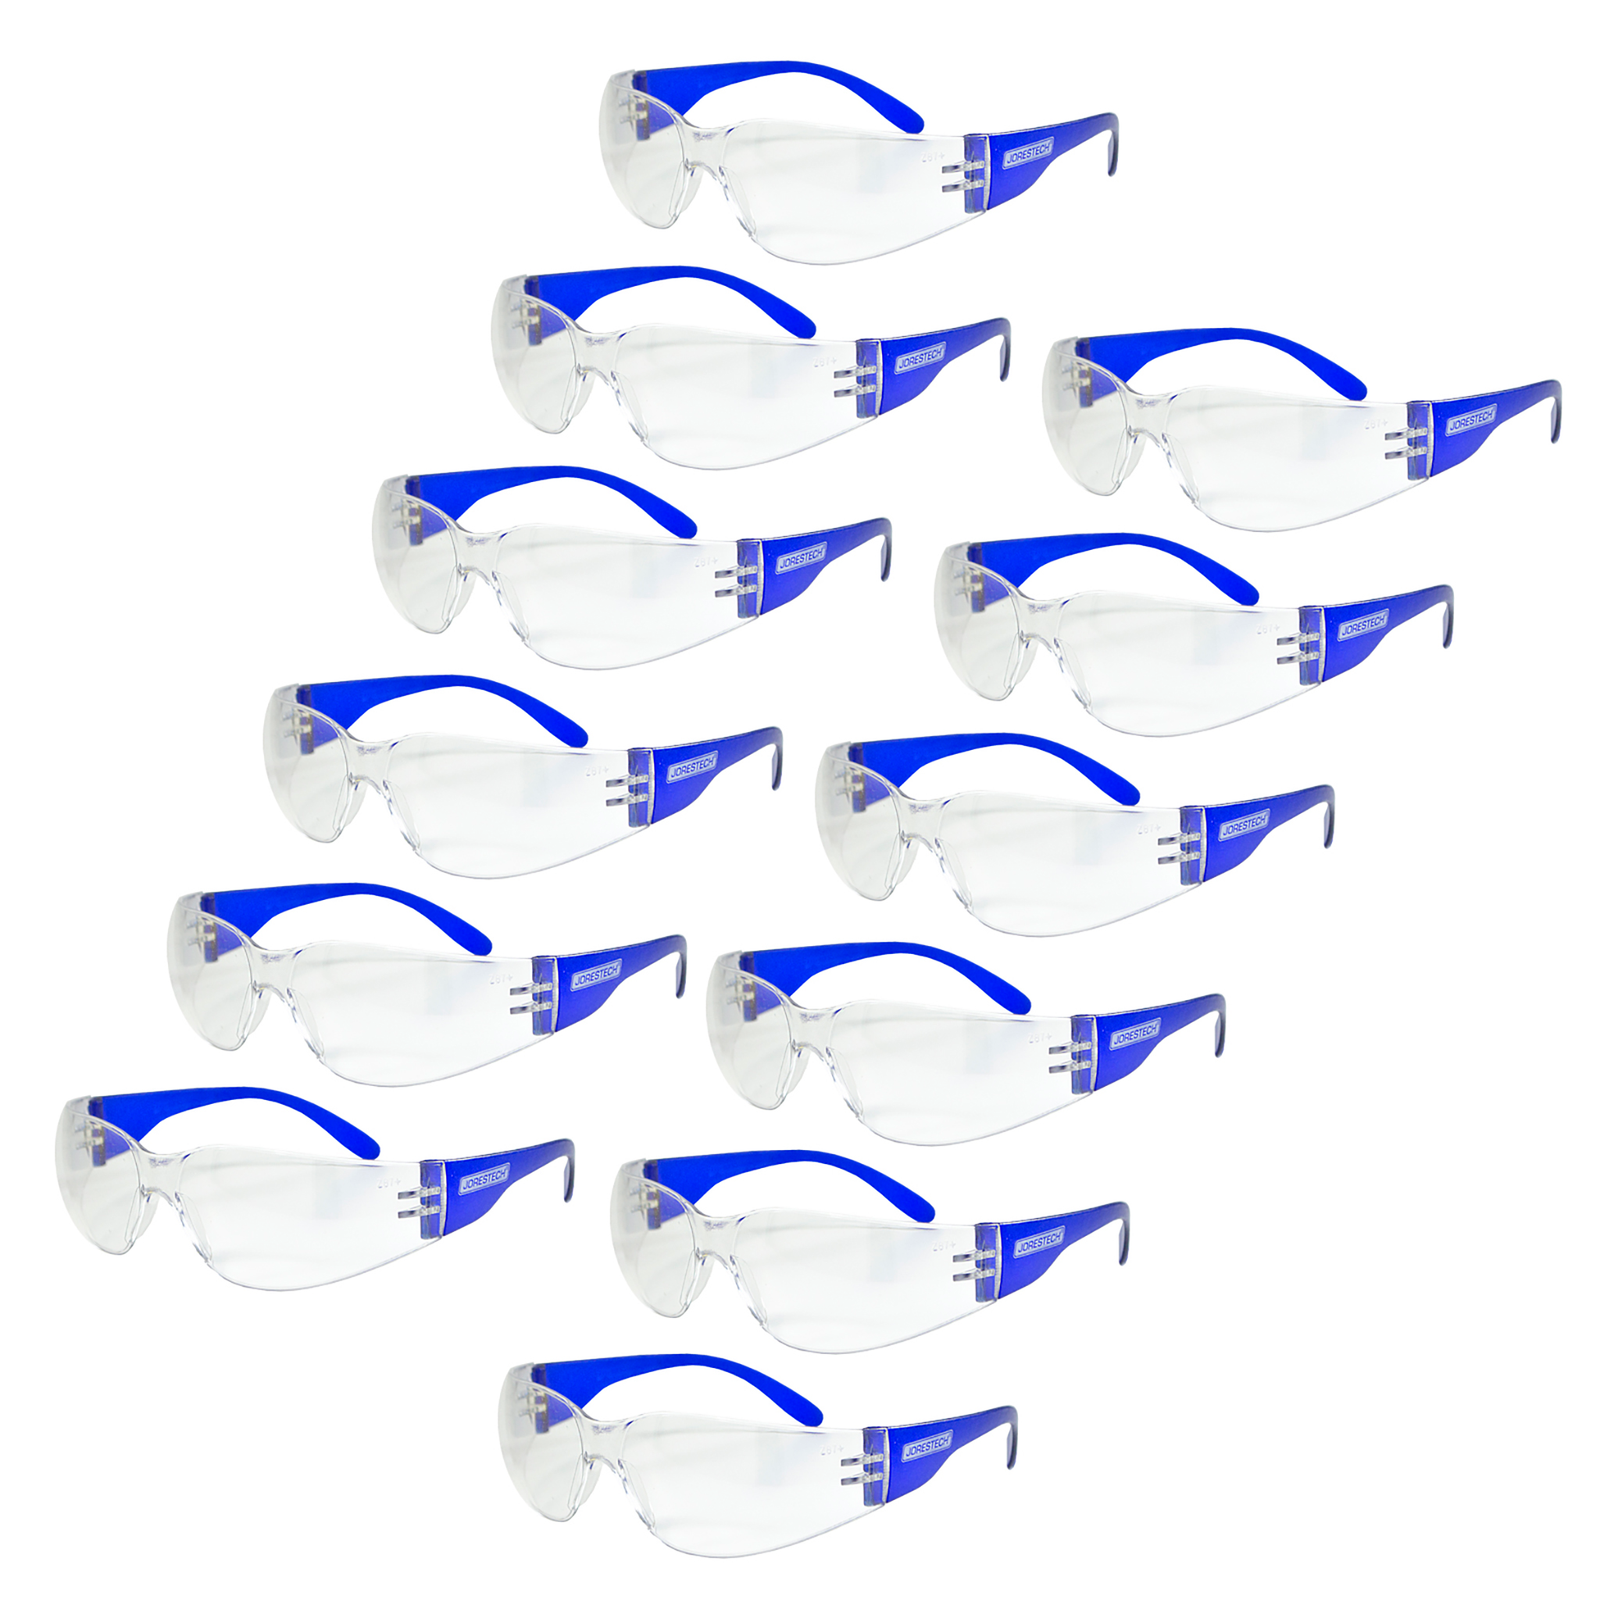 12 clear lens and blue temple  JORESTECH ANSI compliant safety glasses for high impact protection over white background